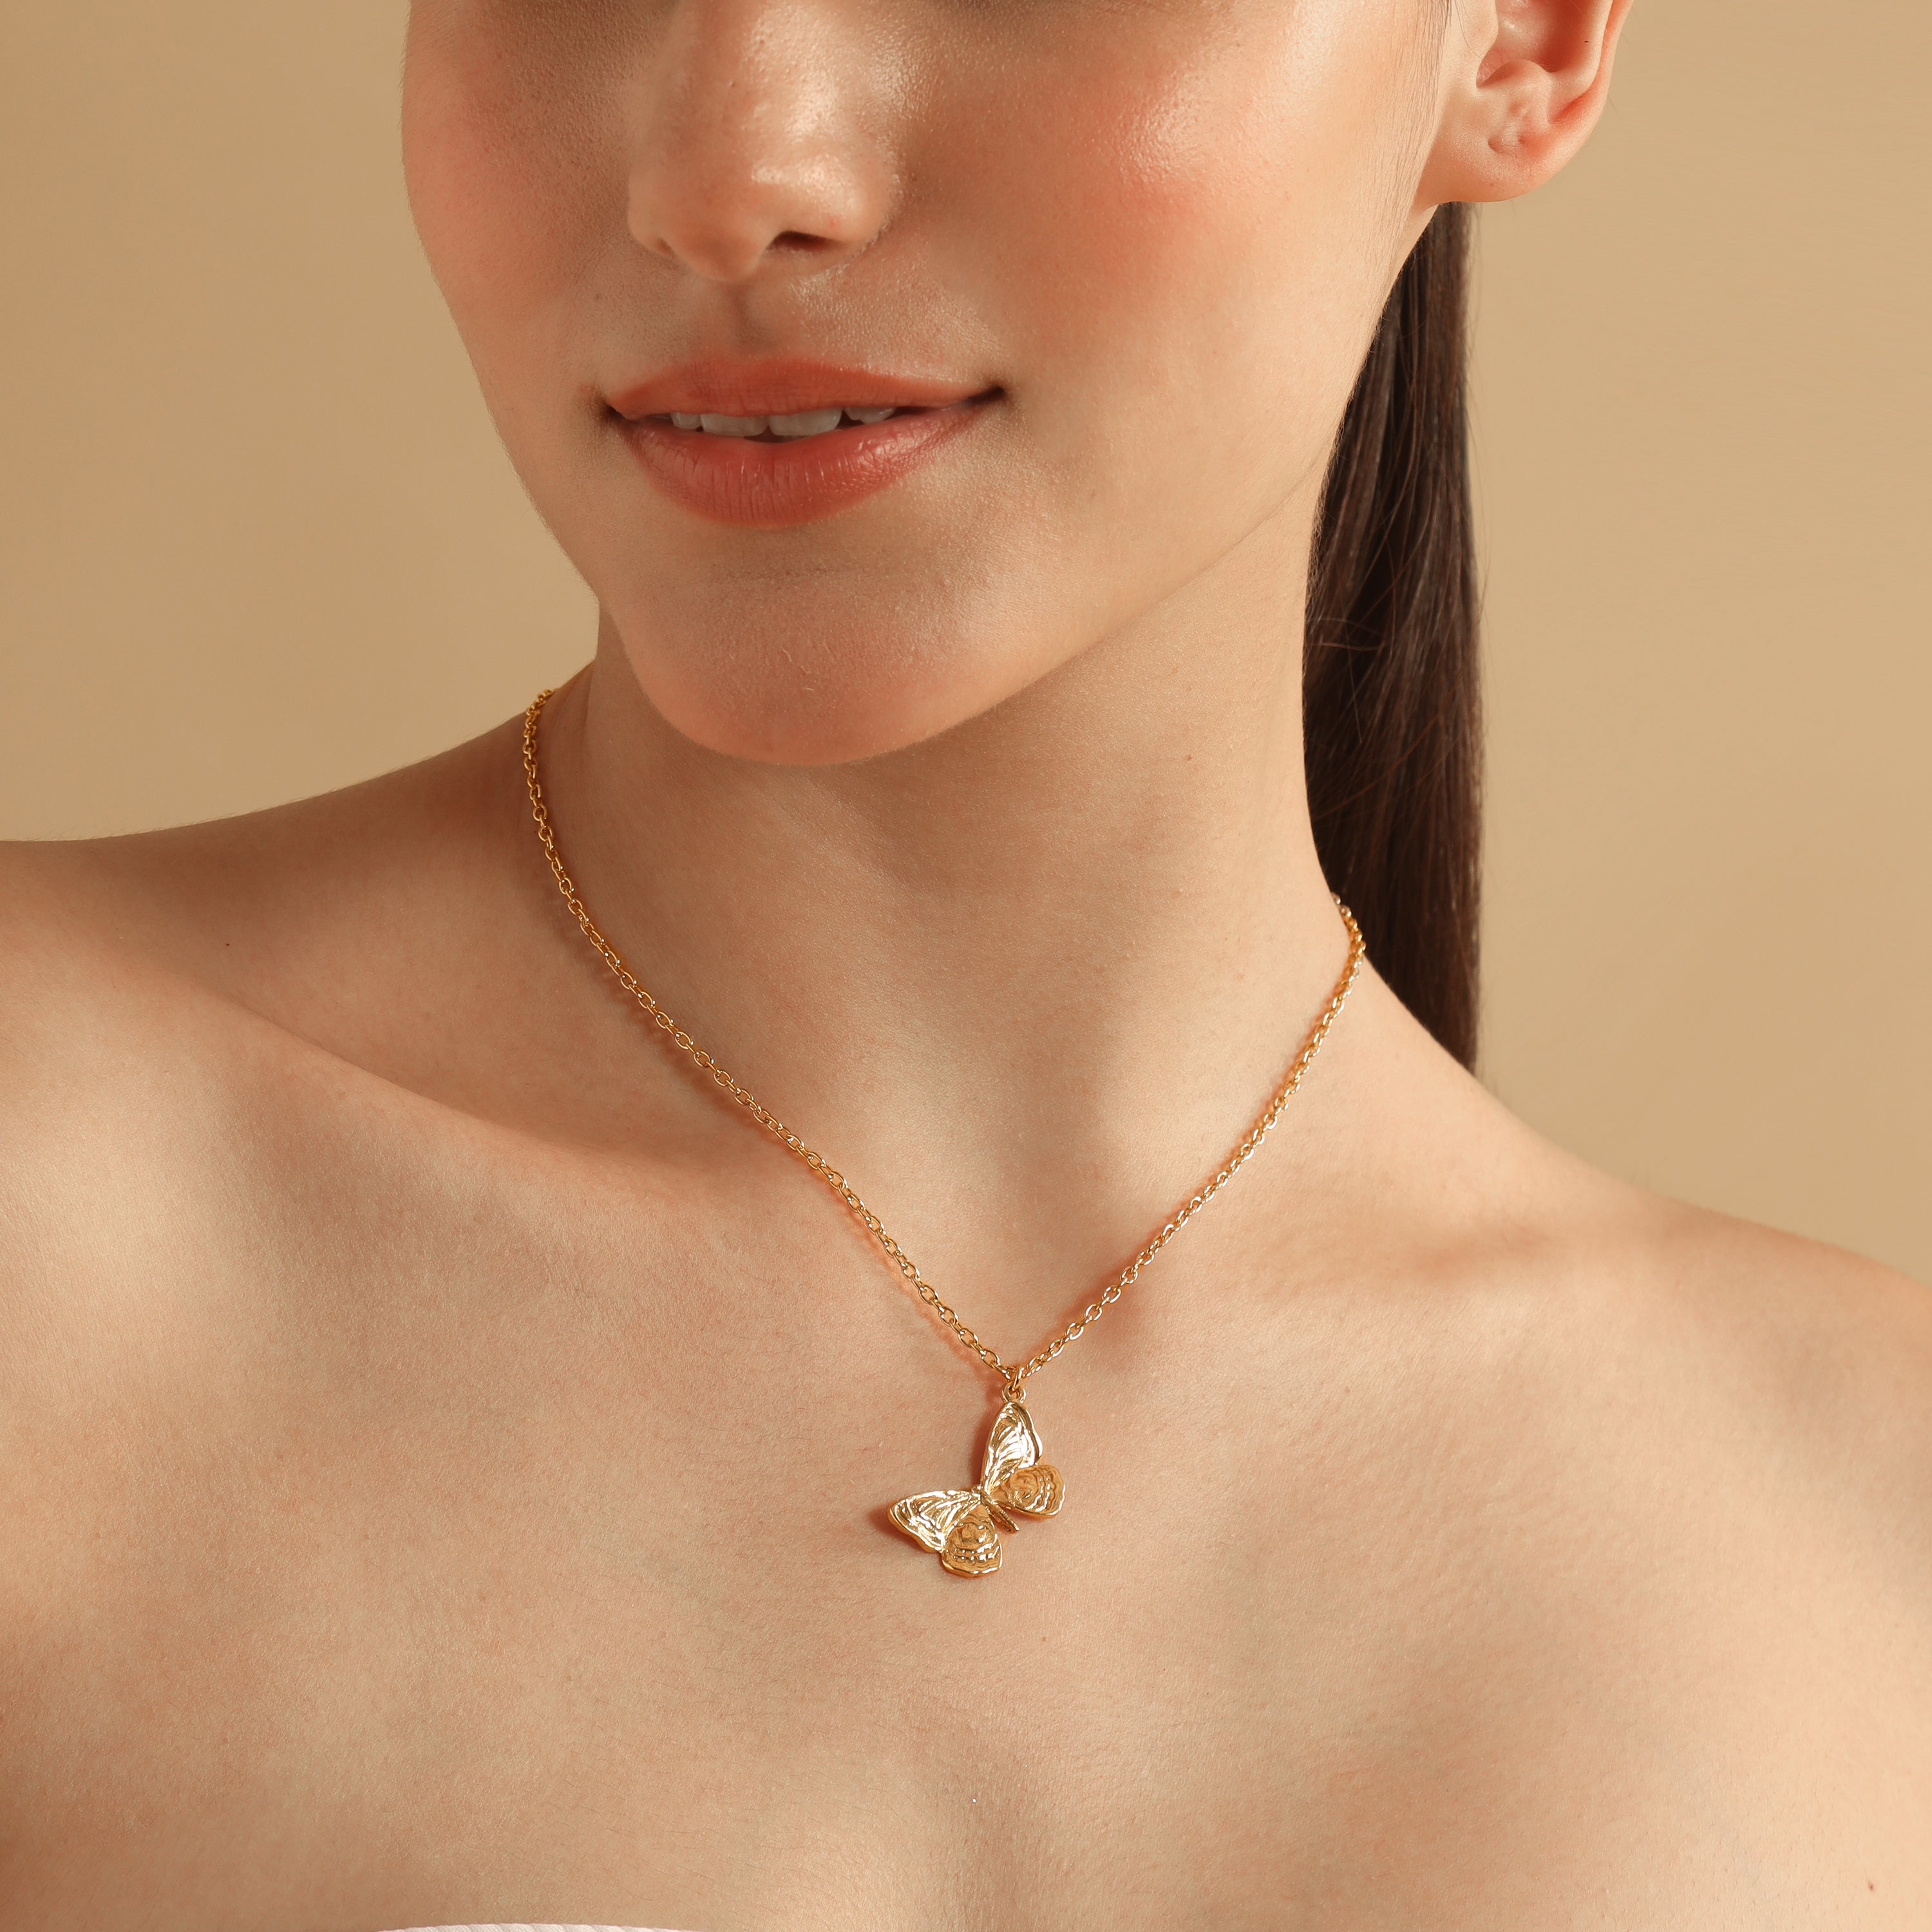 TFC Lucky Butterfly Plated Necklace-Enhance your elegance with our collection of gold-plated necklaces for women. Choose from stunning pendant necklaces, chic choker necklaces, and trendy layered necklaces. Our sleek and dainty designs are both affordable and anti-tarnish, ensuring lasting beauty. Enjoy the cheapest fashion jewellery, lightweight and stylish- only at The Fun Company